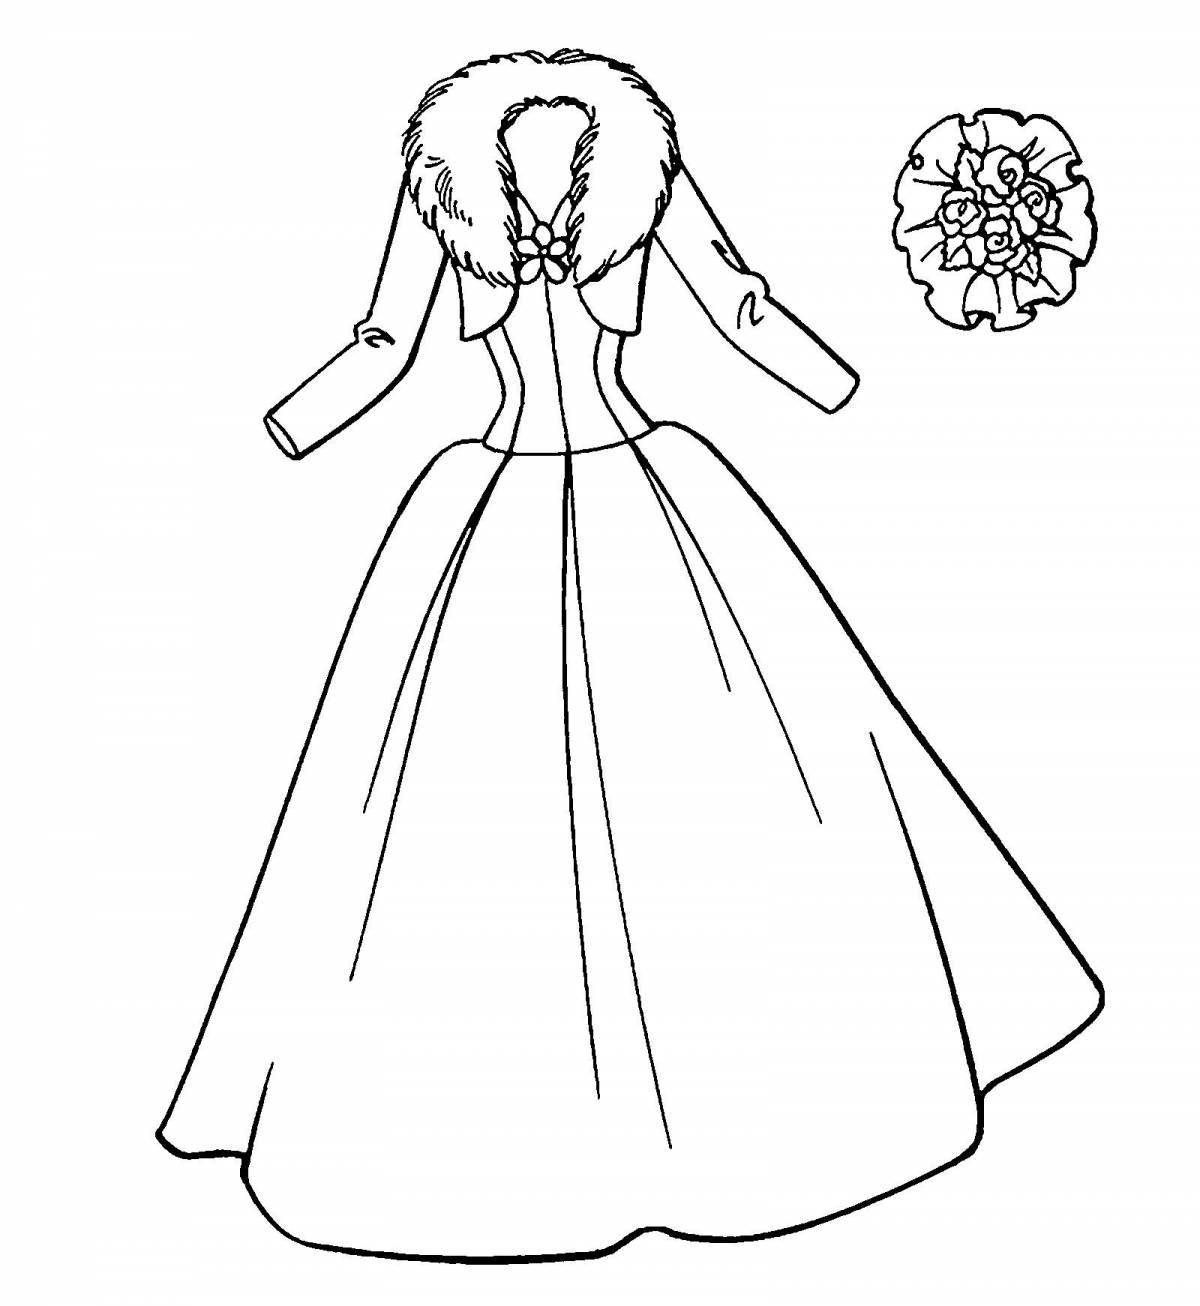 Coloring page gentle dress for a doll